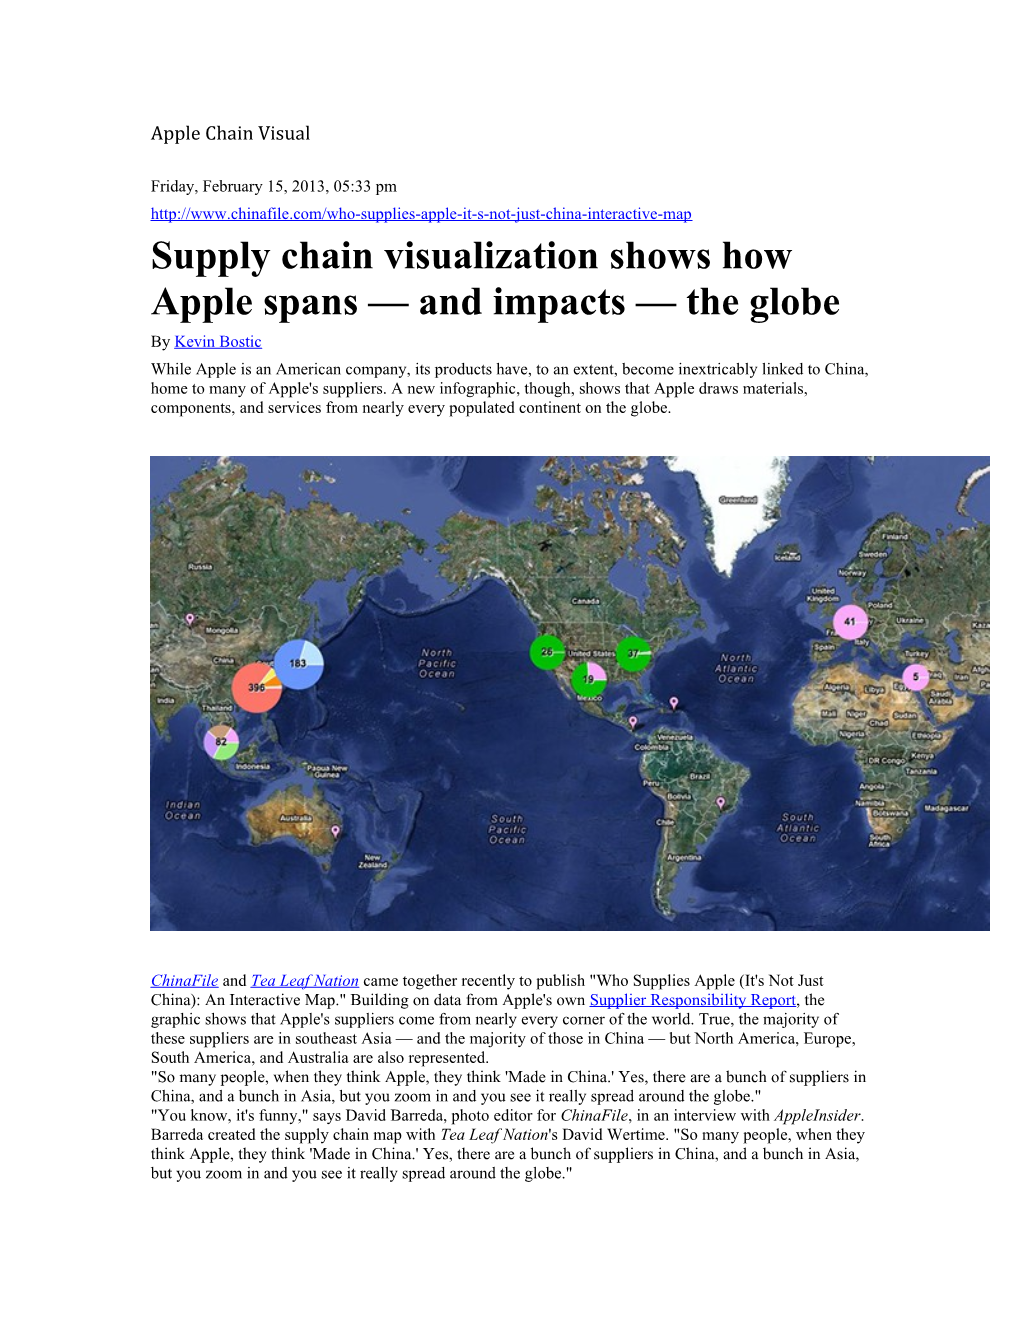 Supply Chain Visualization Shows How Apple Spans and Impacts the Globe